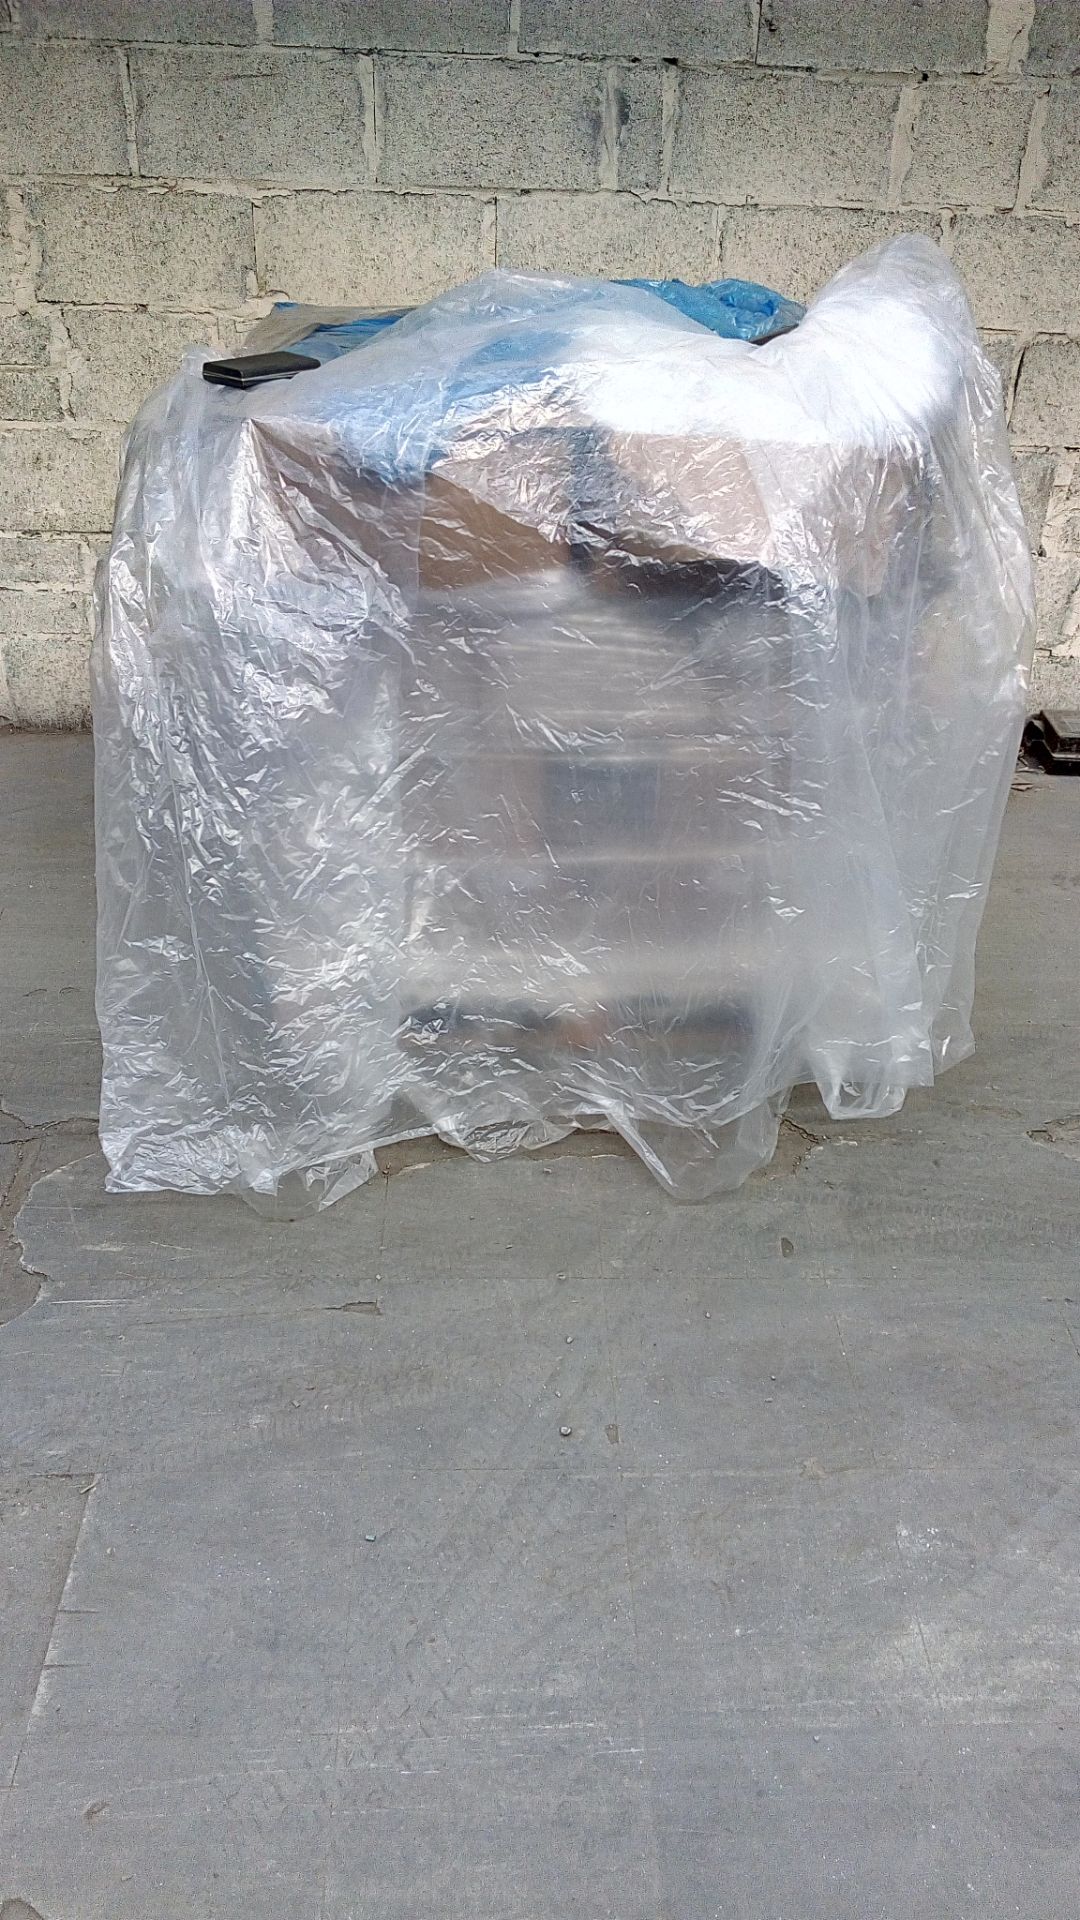 A Pallet of Large Polythene Bags